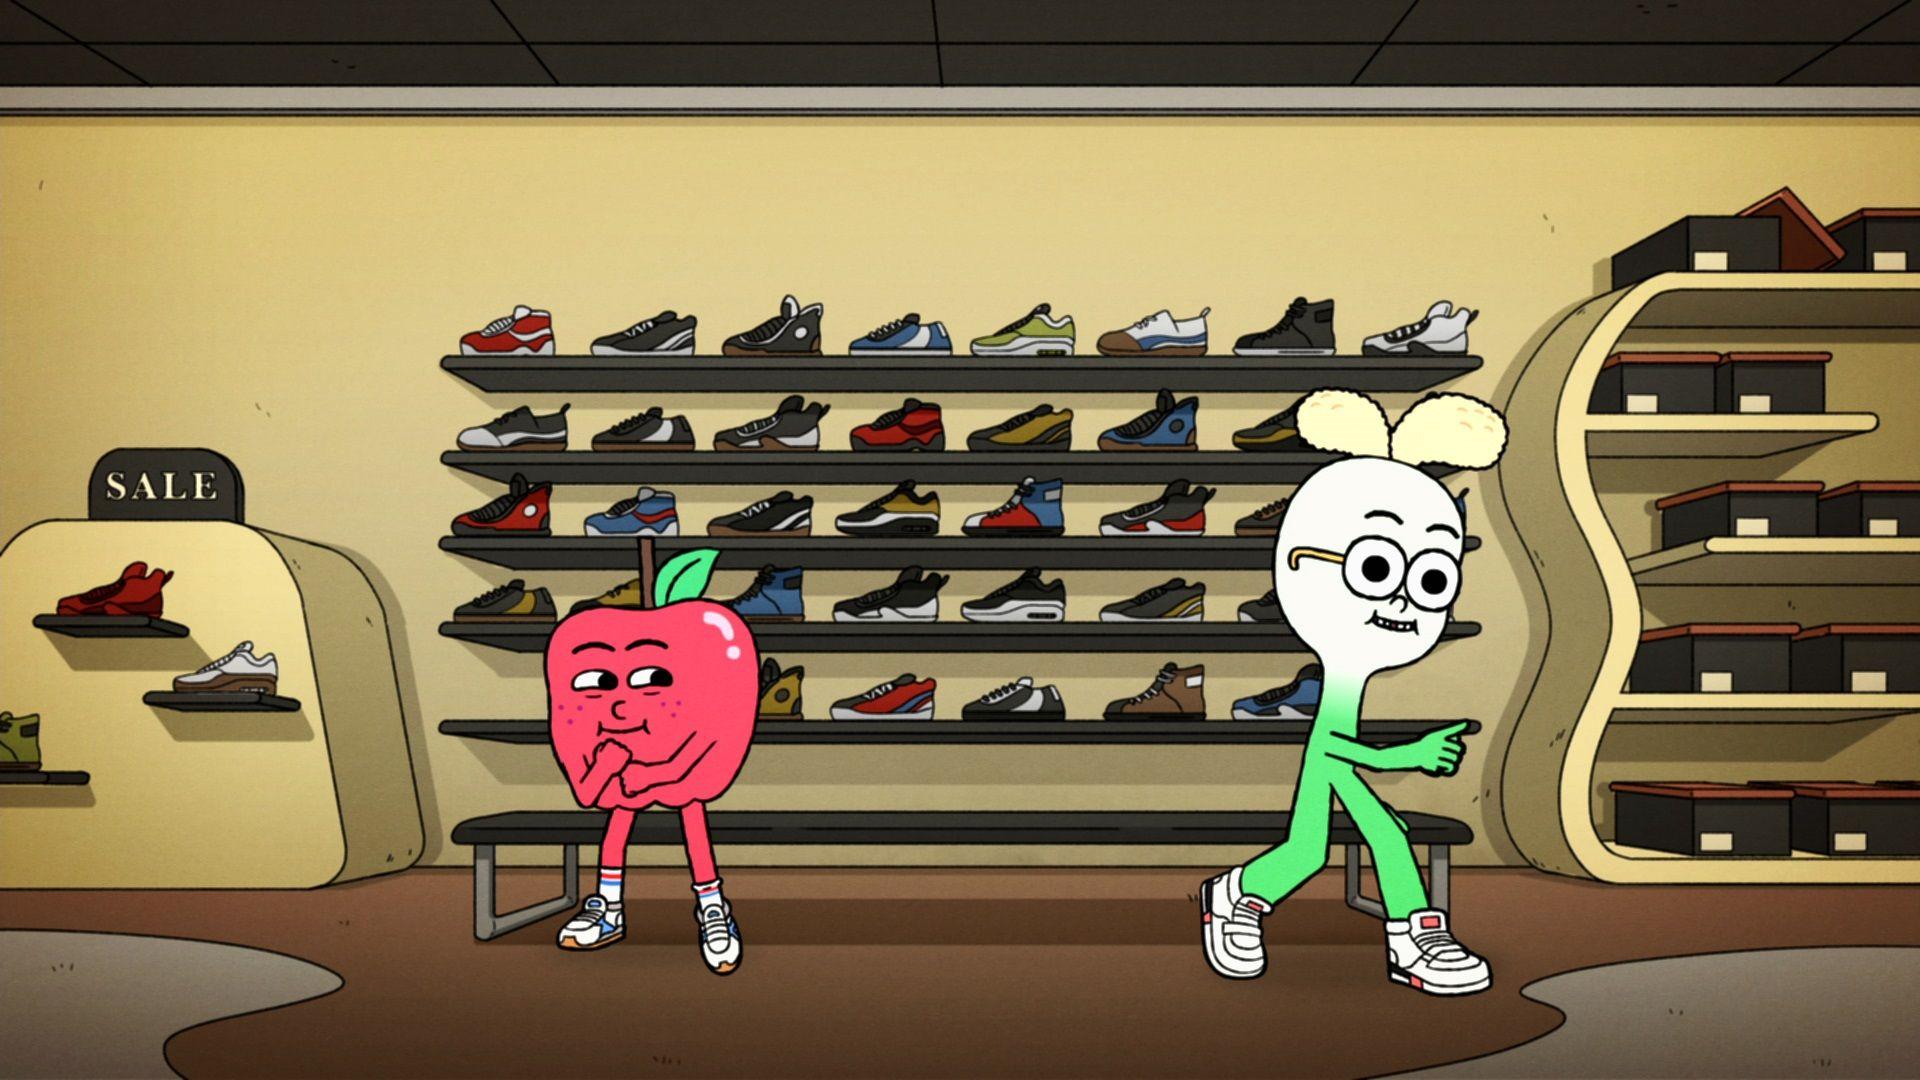 A New Life Begins for Apple and Onion on Cartoon Network's New Show